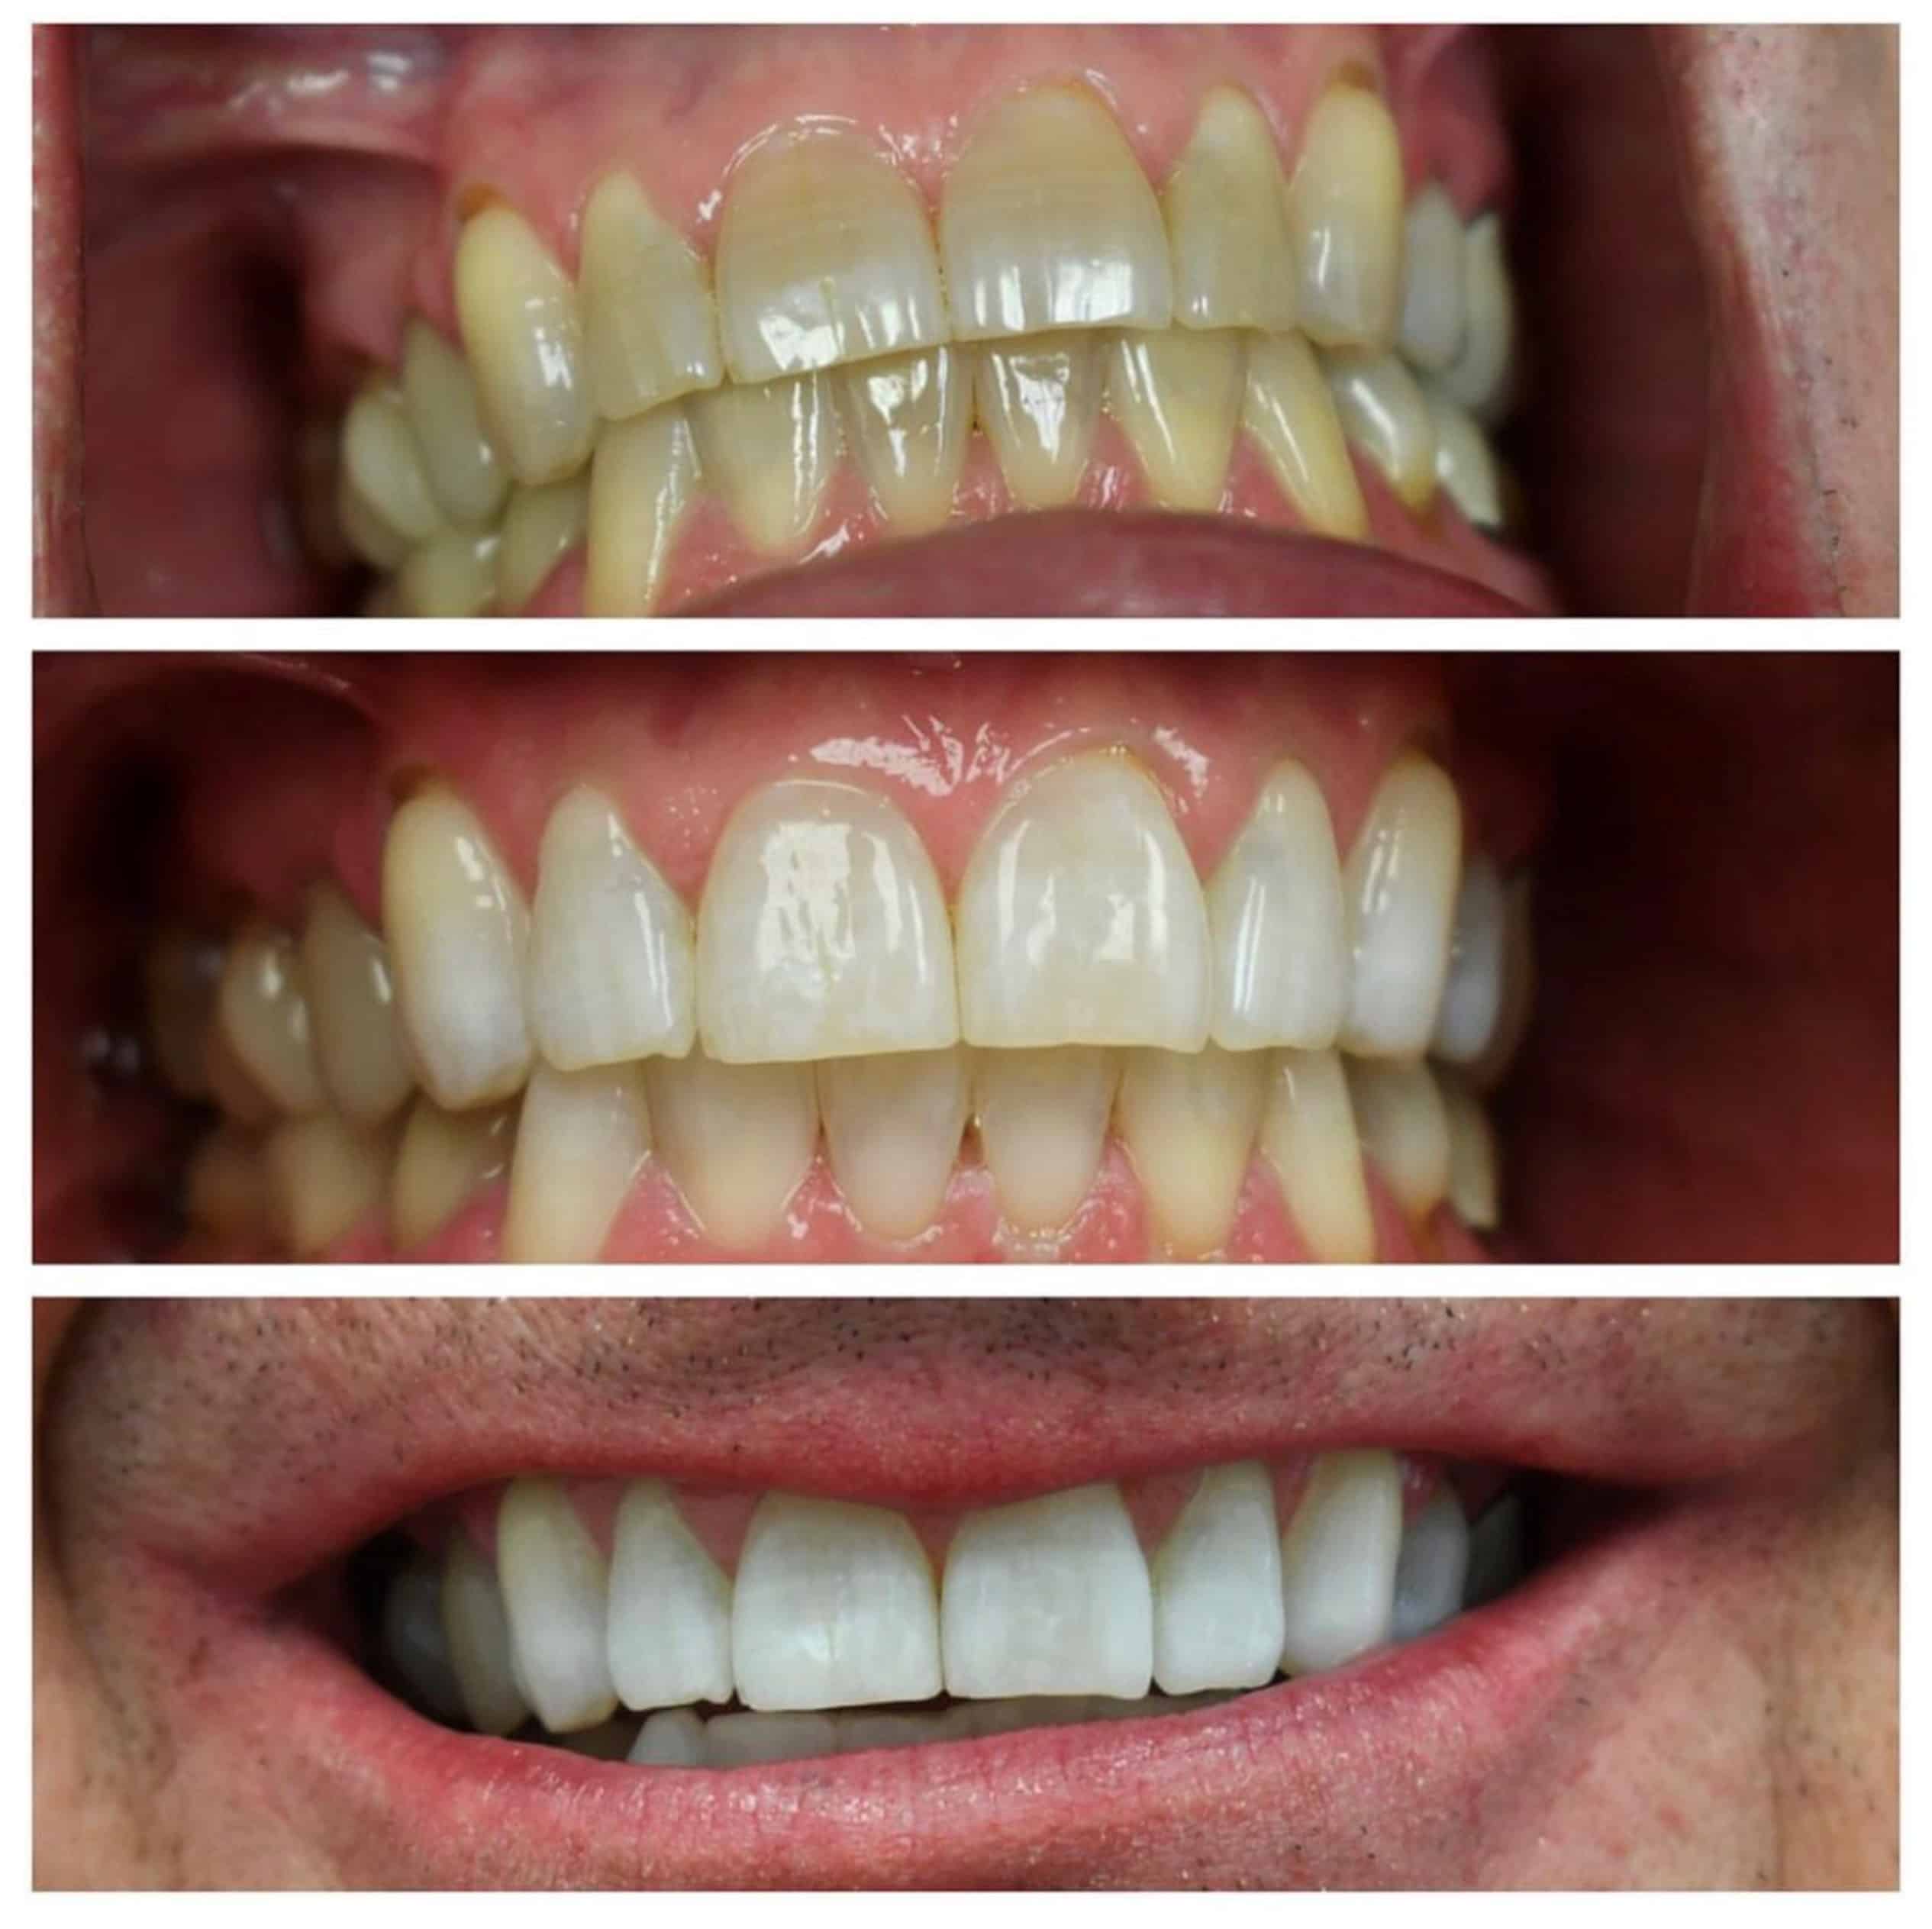 Man after getting a tooth whitening treatment in Brentwood, TN